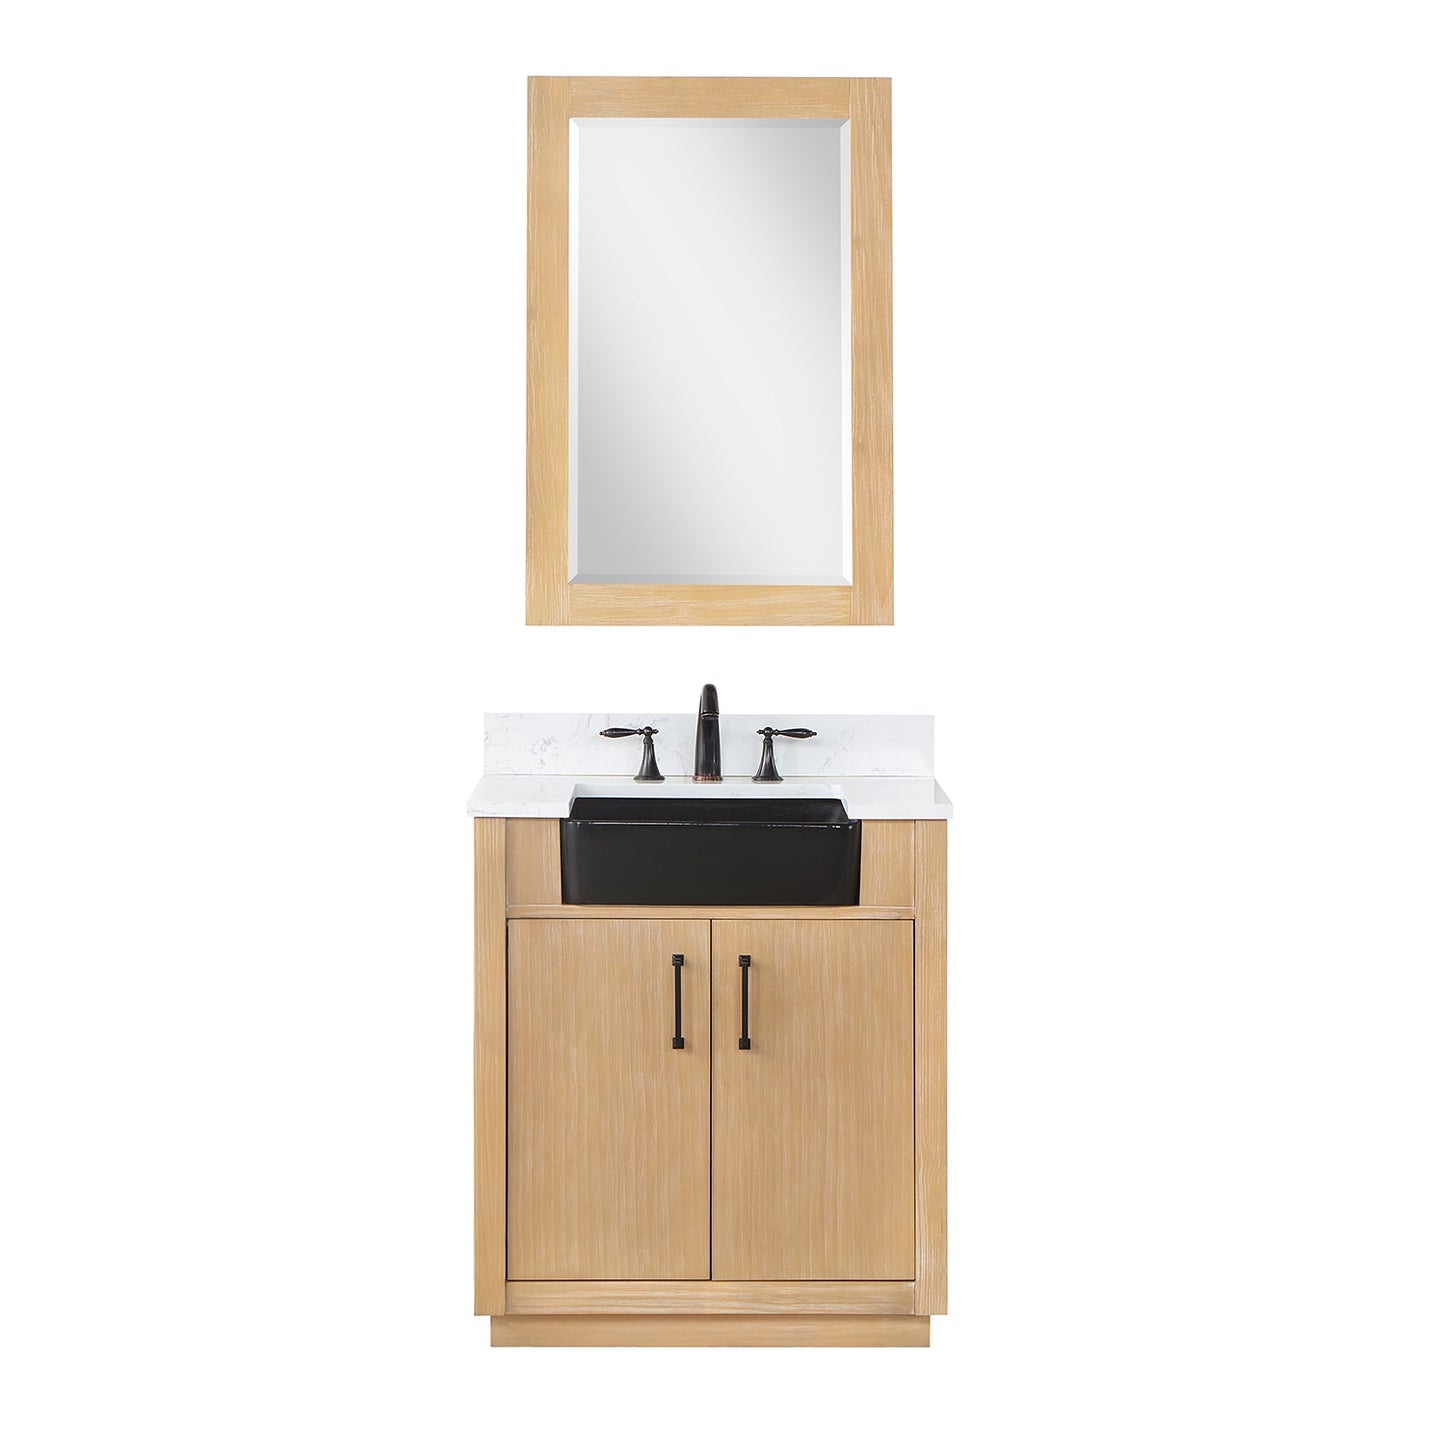 Novago 30" Single Bathroom Vanity in Weathered Pine with Carrara White Composite Stone Countertop and Farmhouse Sink with Mirror